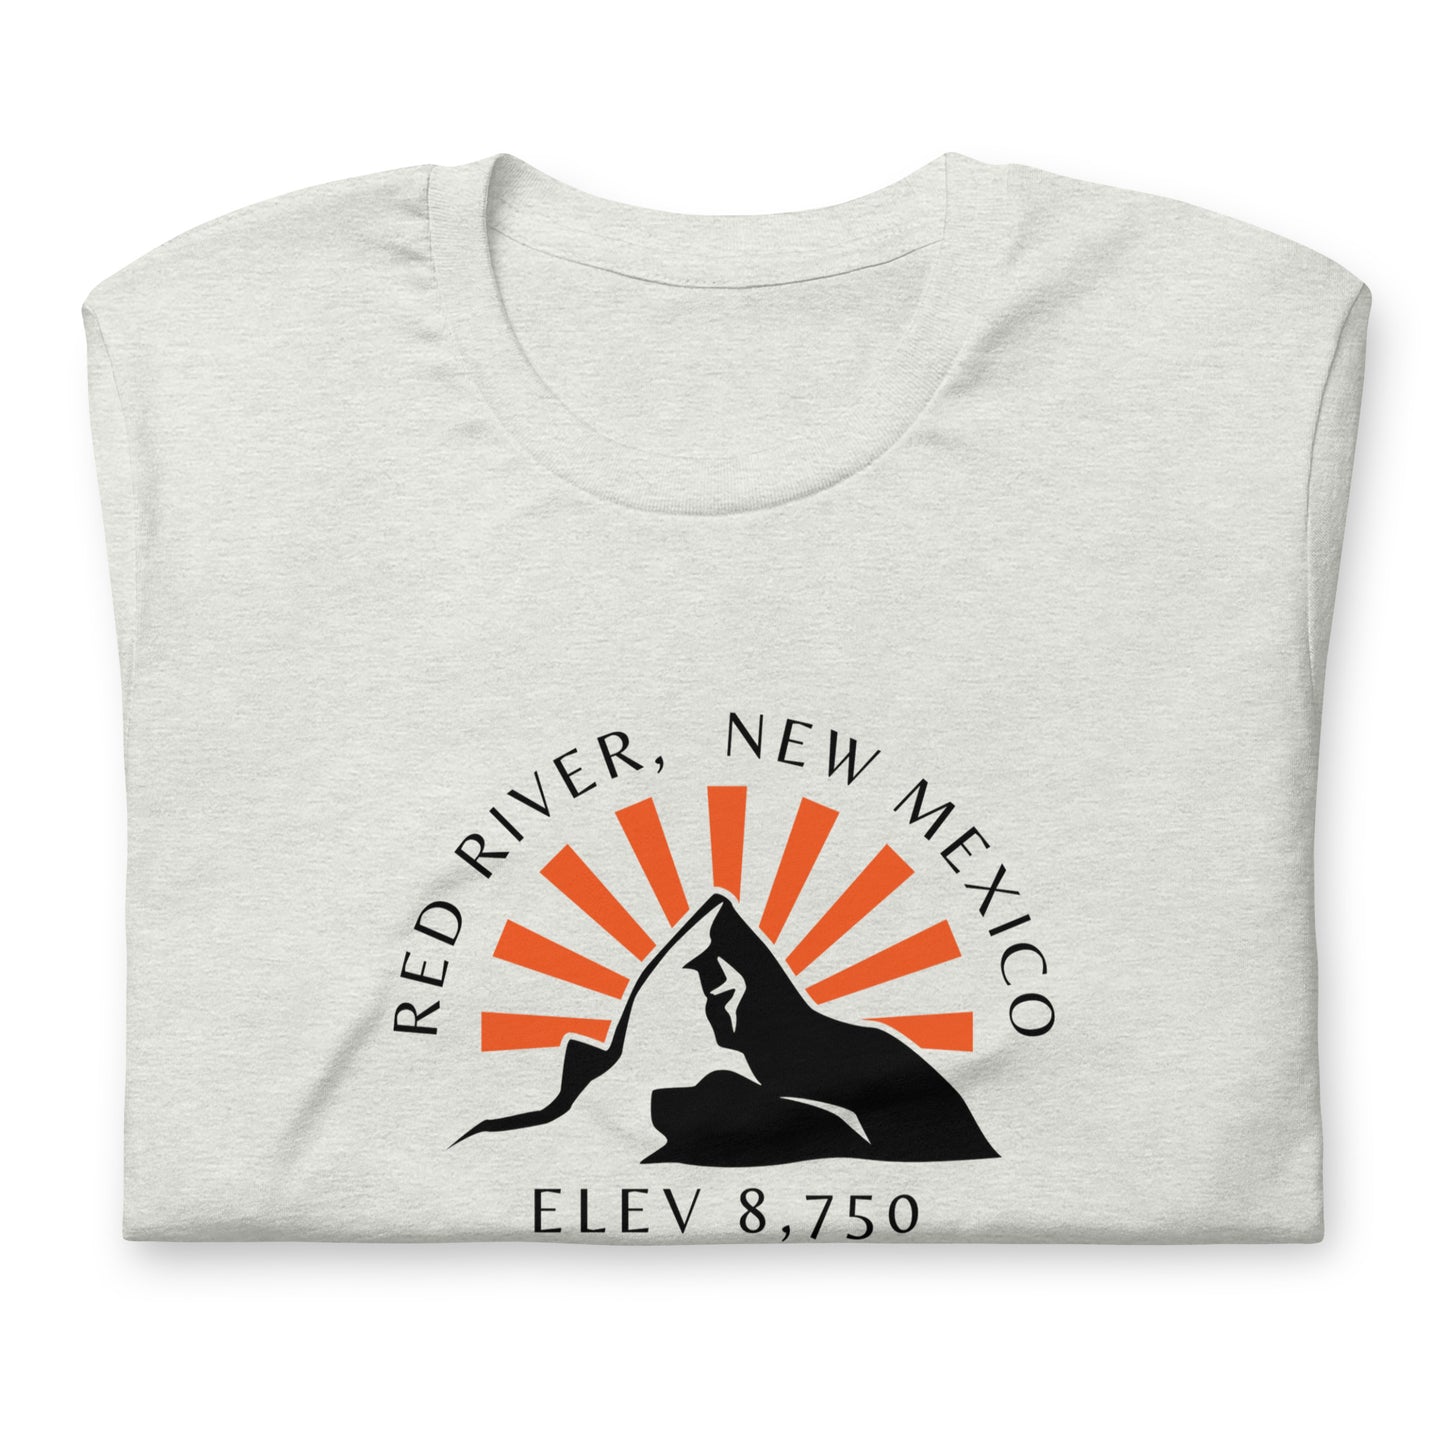 Red River New Mexico Mountain Town Elevation T-Shirt